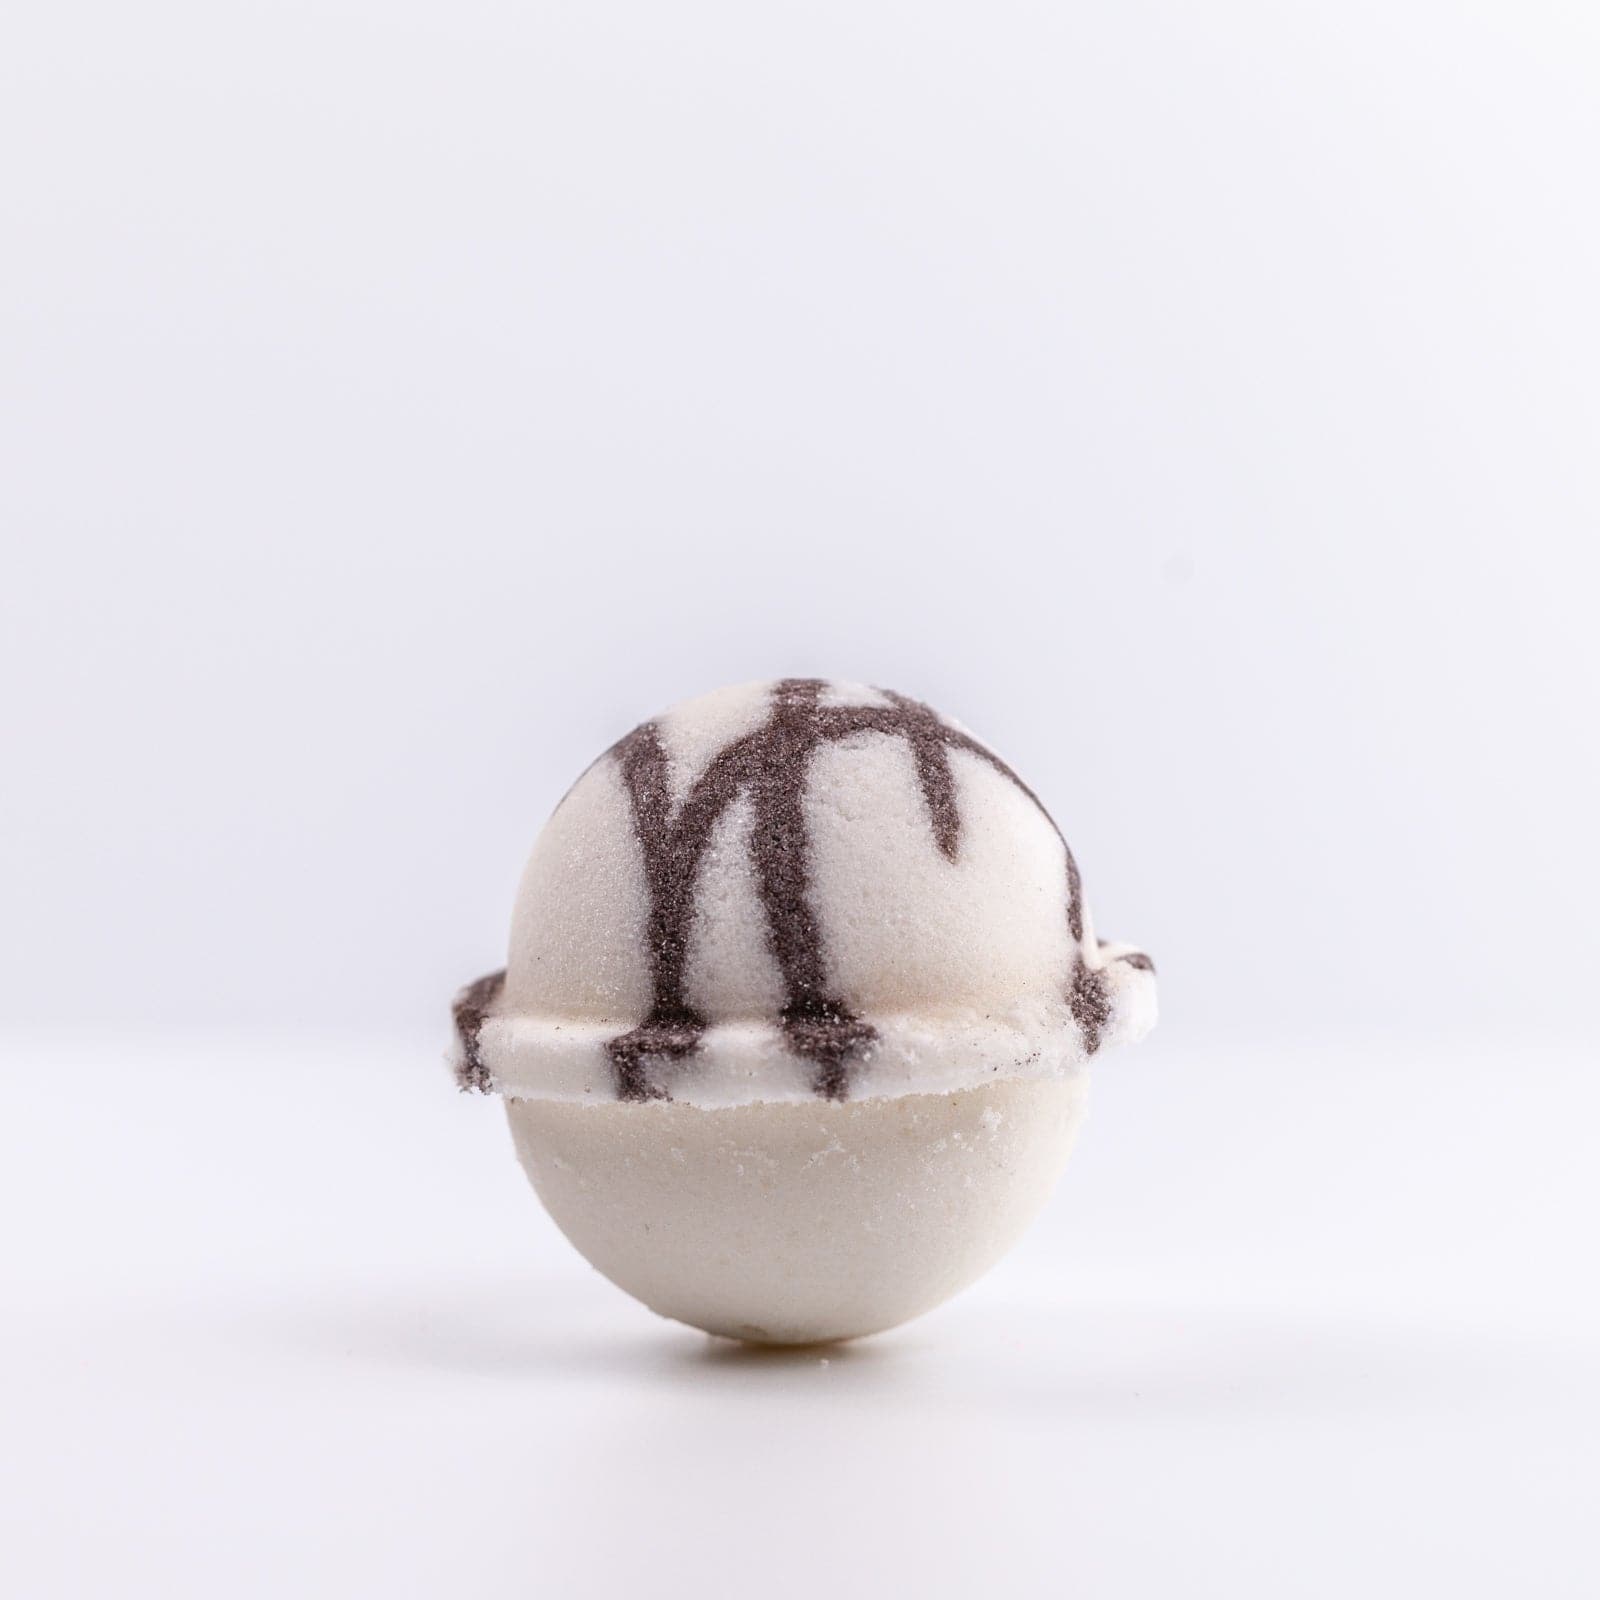 Coconut Bath Bomb with brown and white design against white background